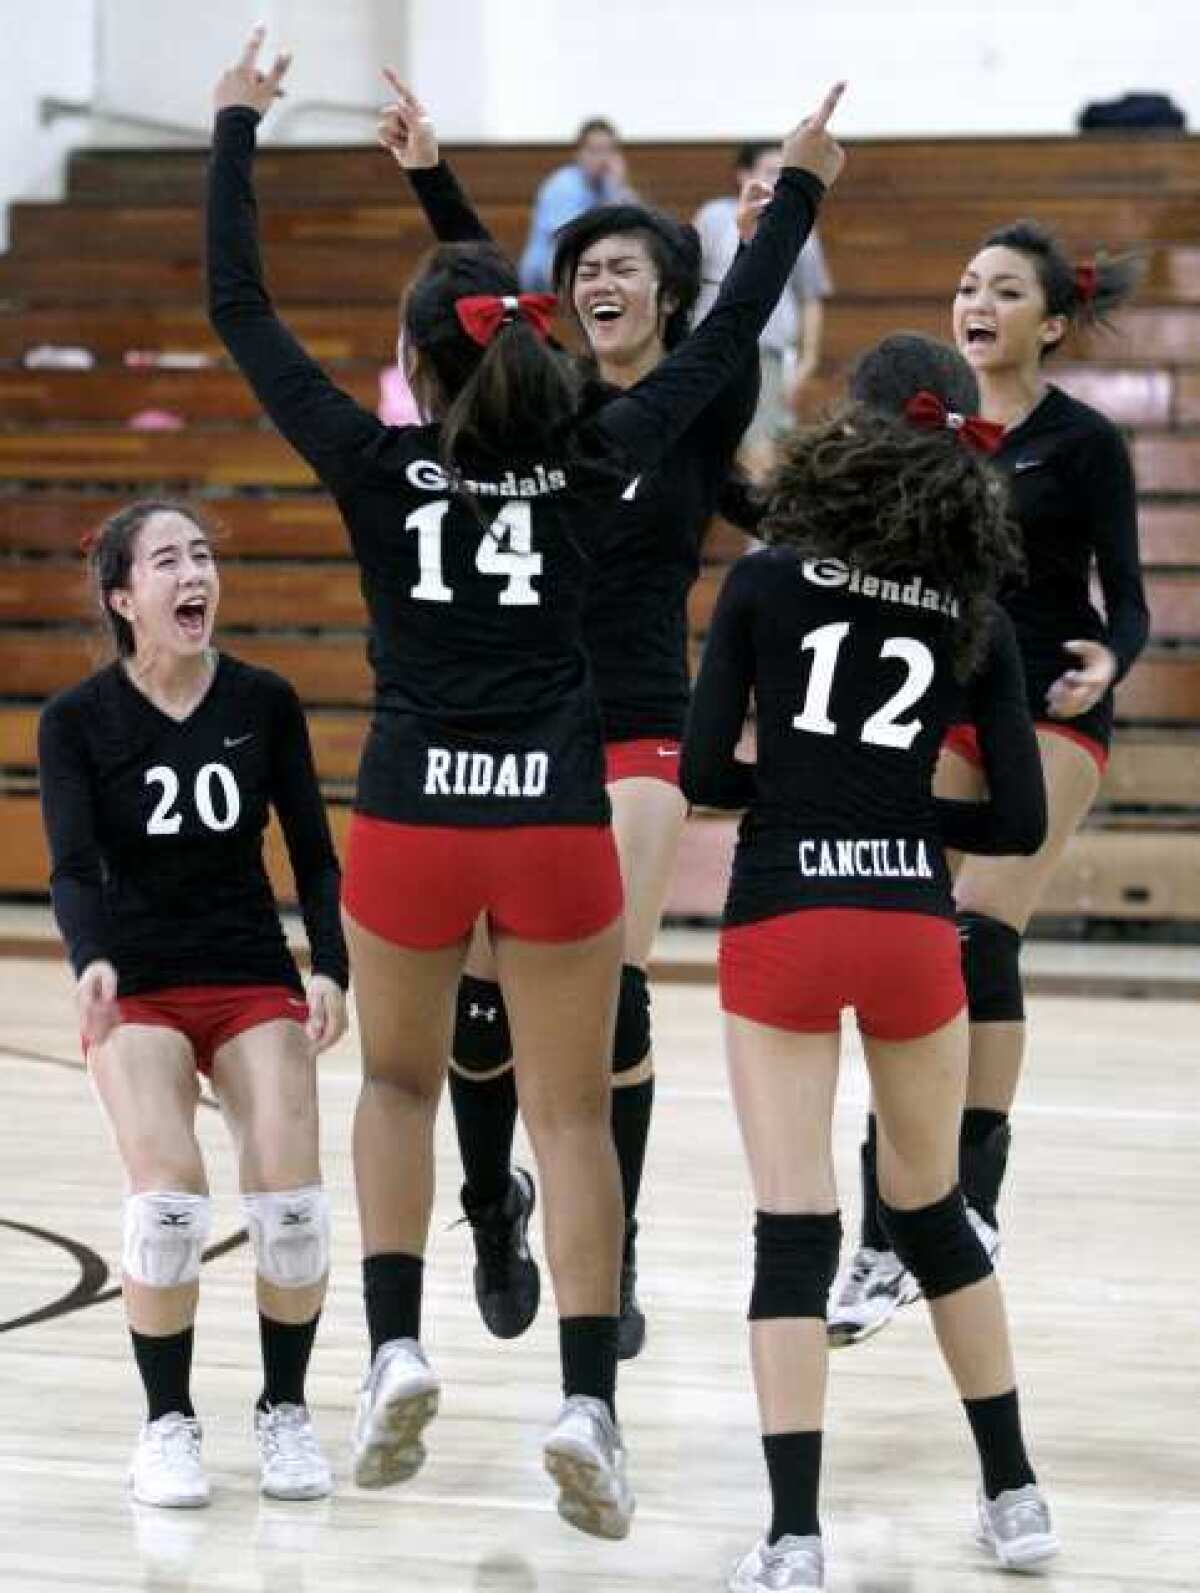 The Glendale High School girls' volleyball team celebrates their win over rival Crescenta Valley.